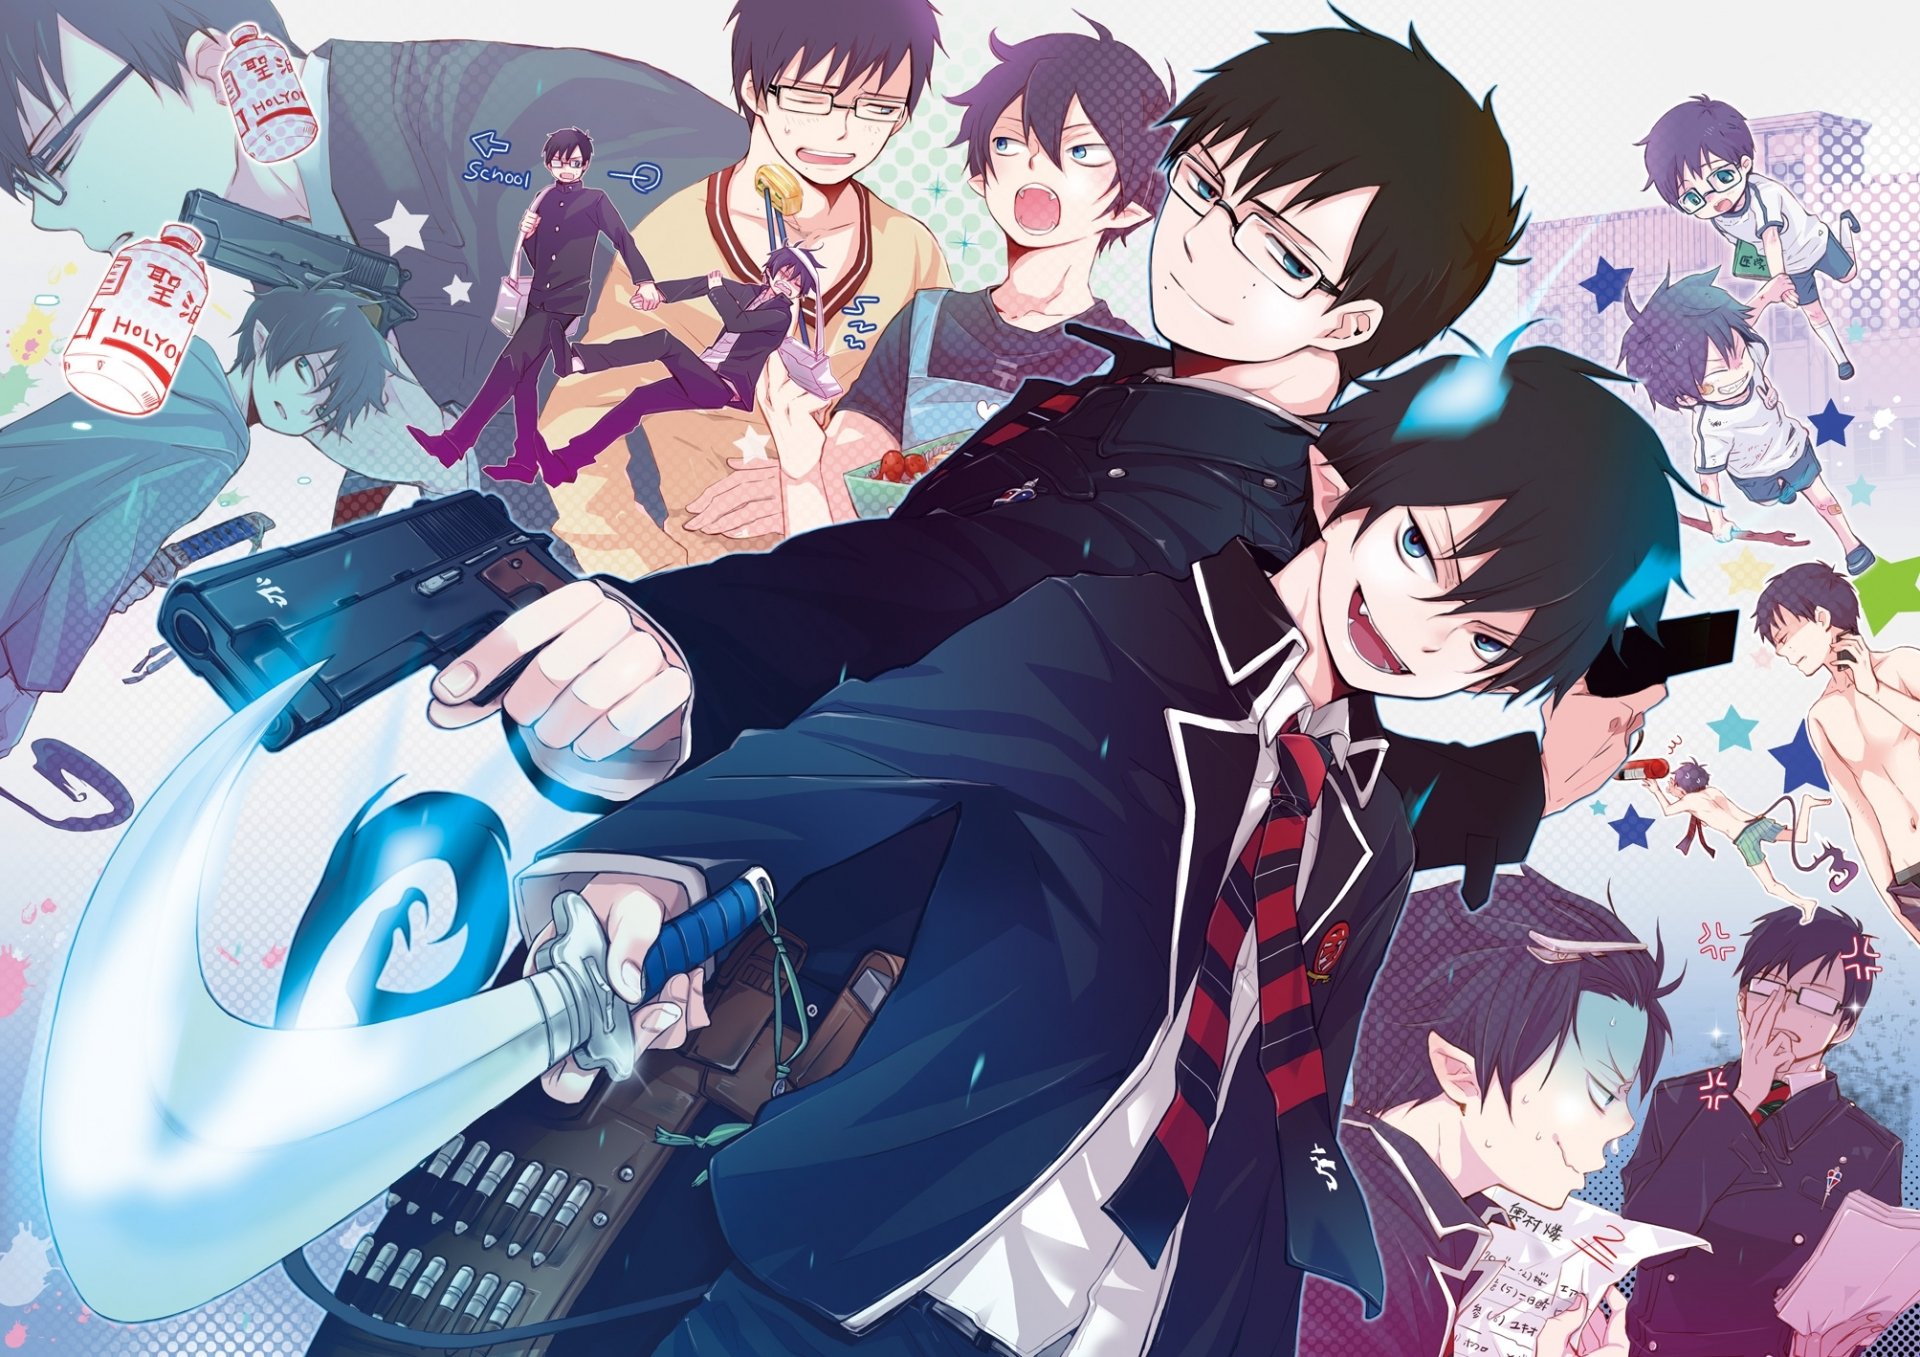 4. "Blue Exorcist" - wide 3